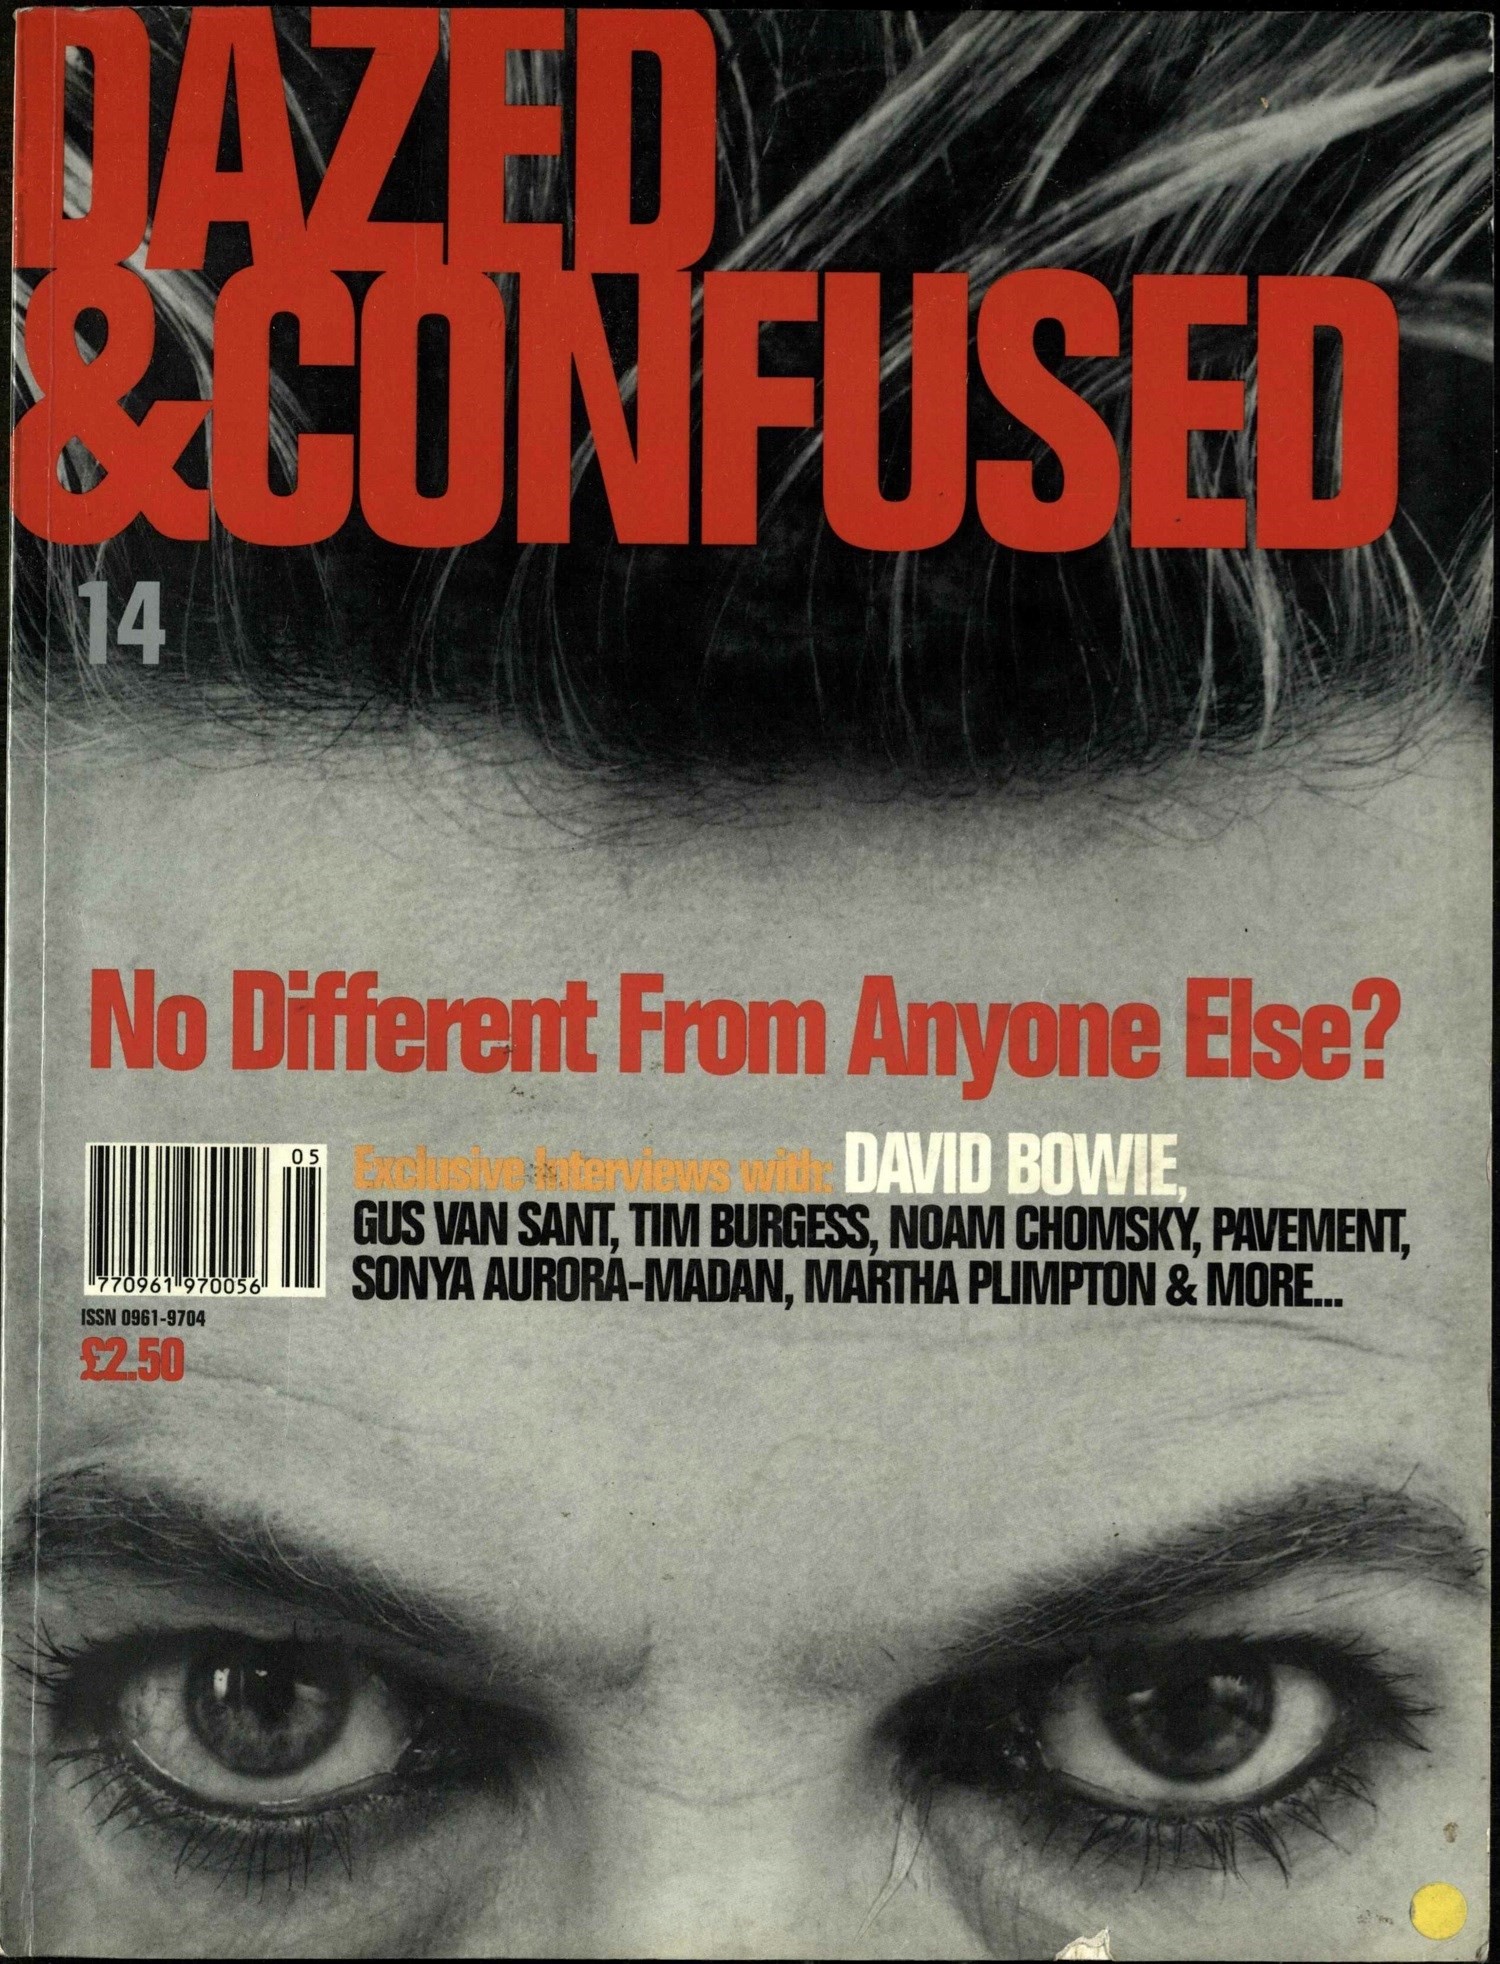 Dazed &amp; Confused Issue 14 David Bowie